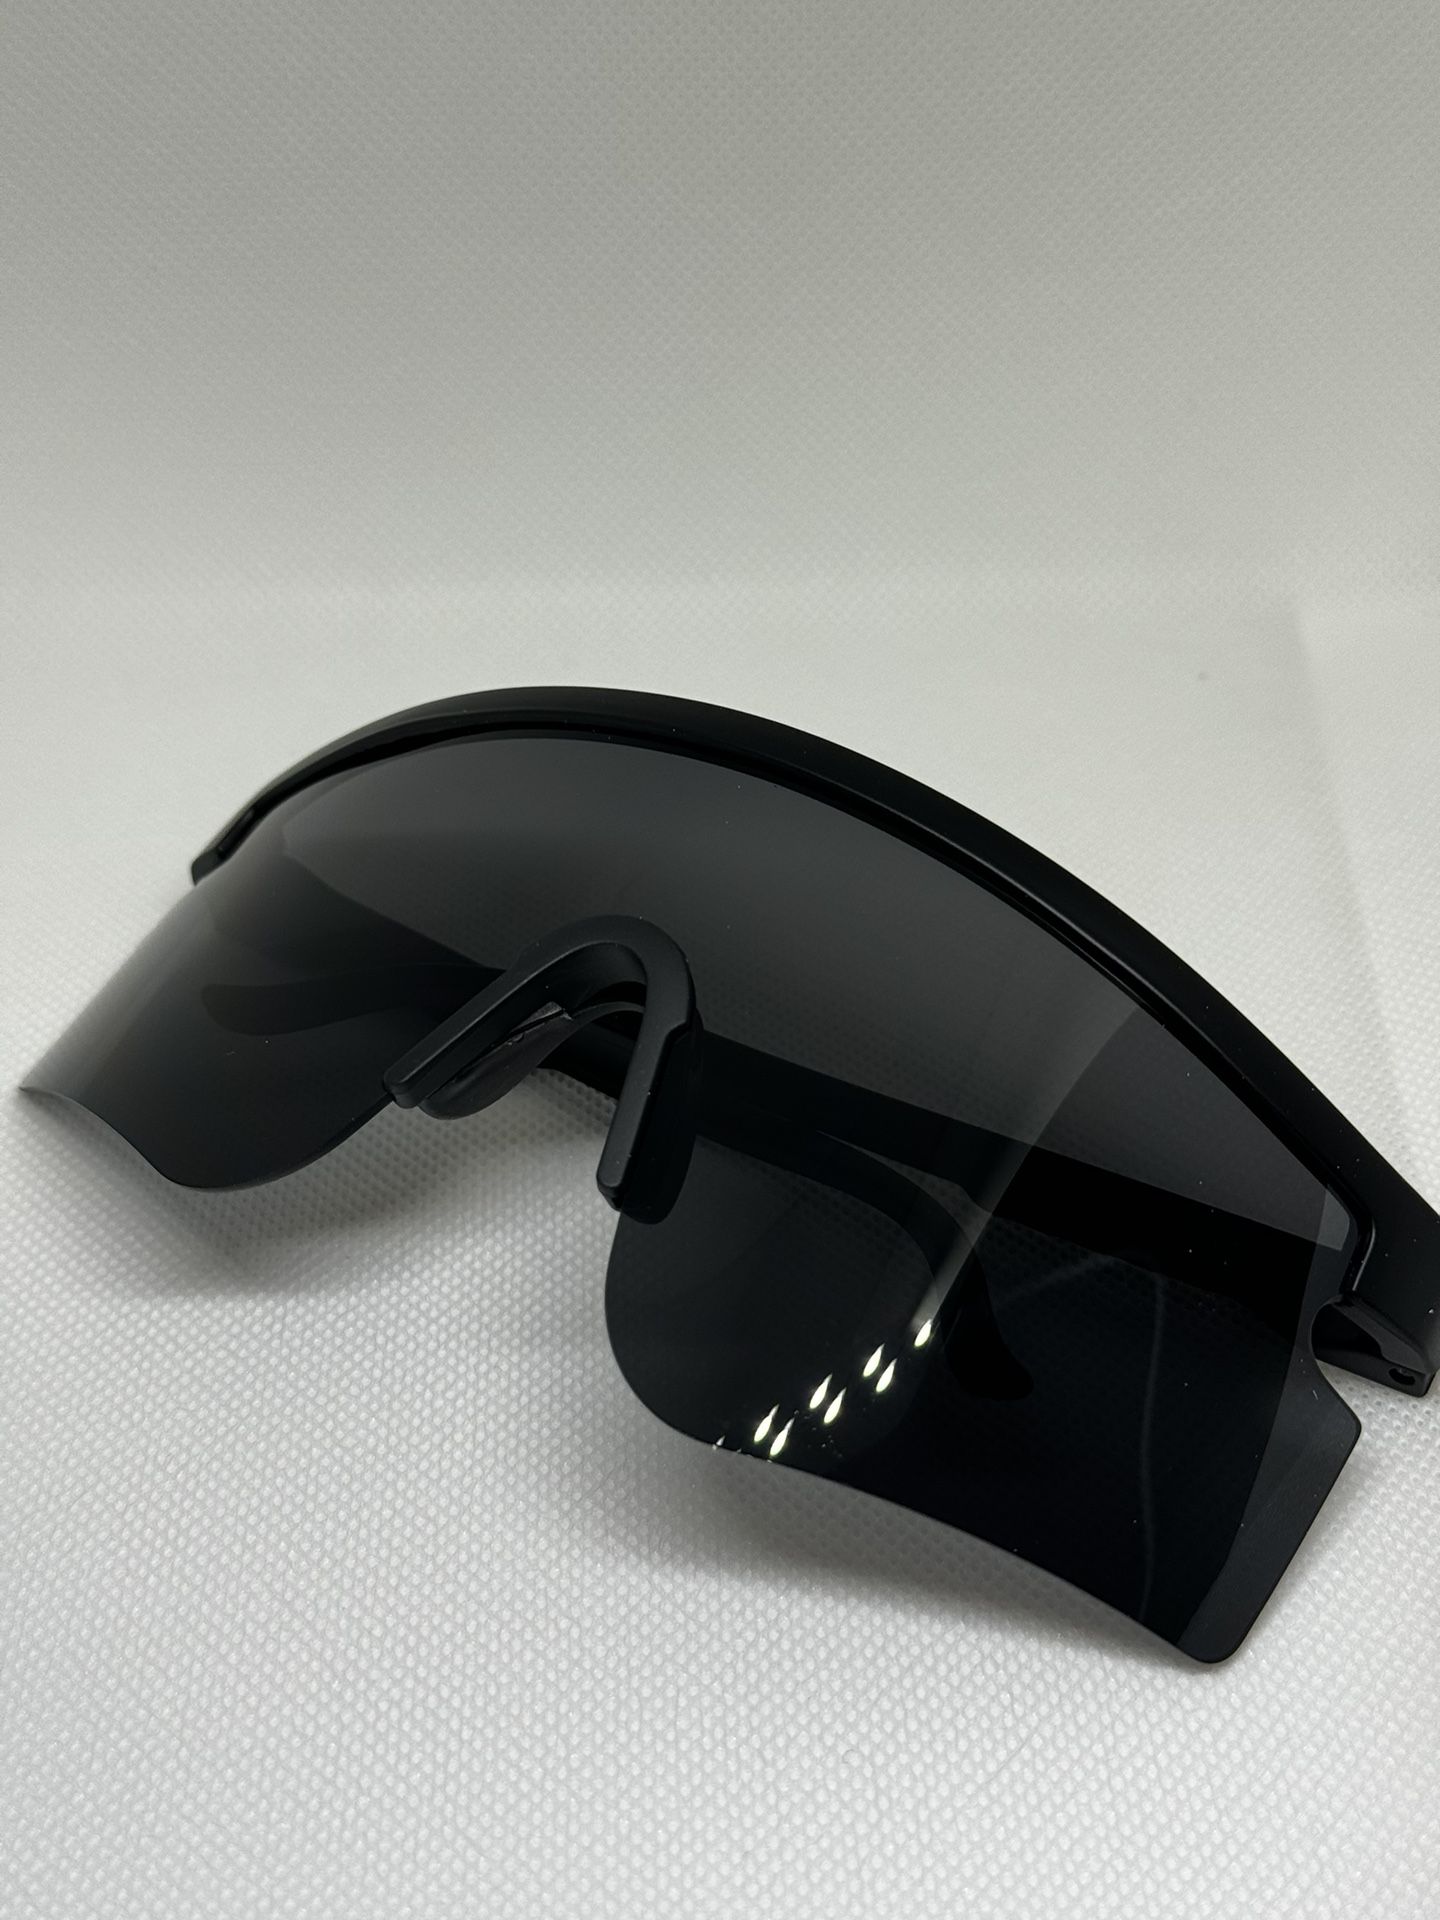 Sporty One-Piece Sunglasses for Women and Men, Wraparound Sunglasses for Cycling and Hiking, Non-Skid Frame